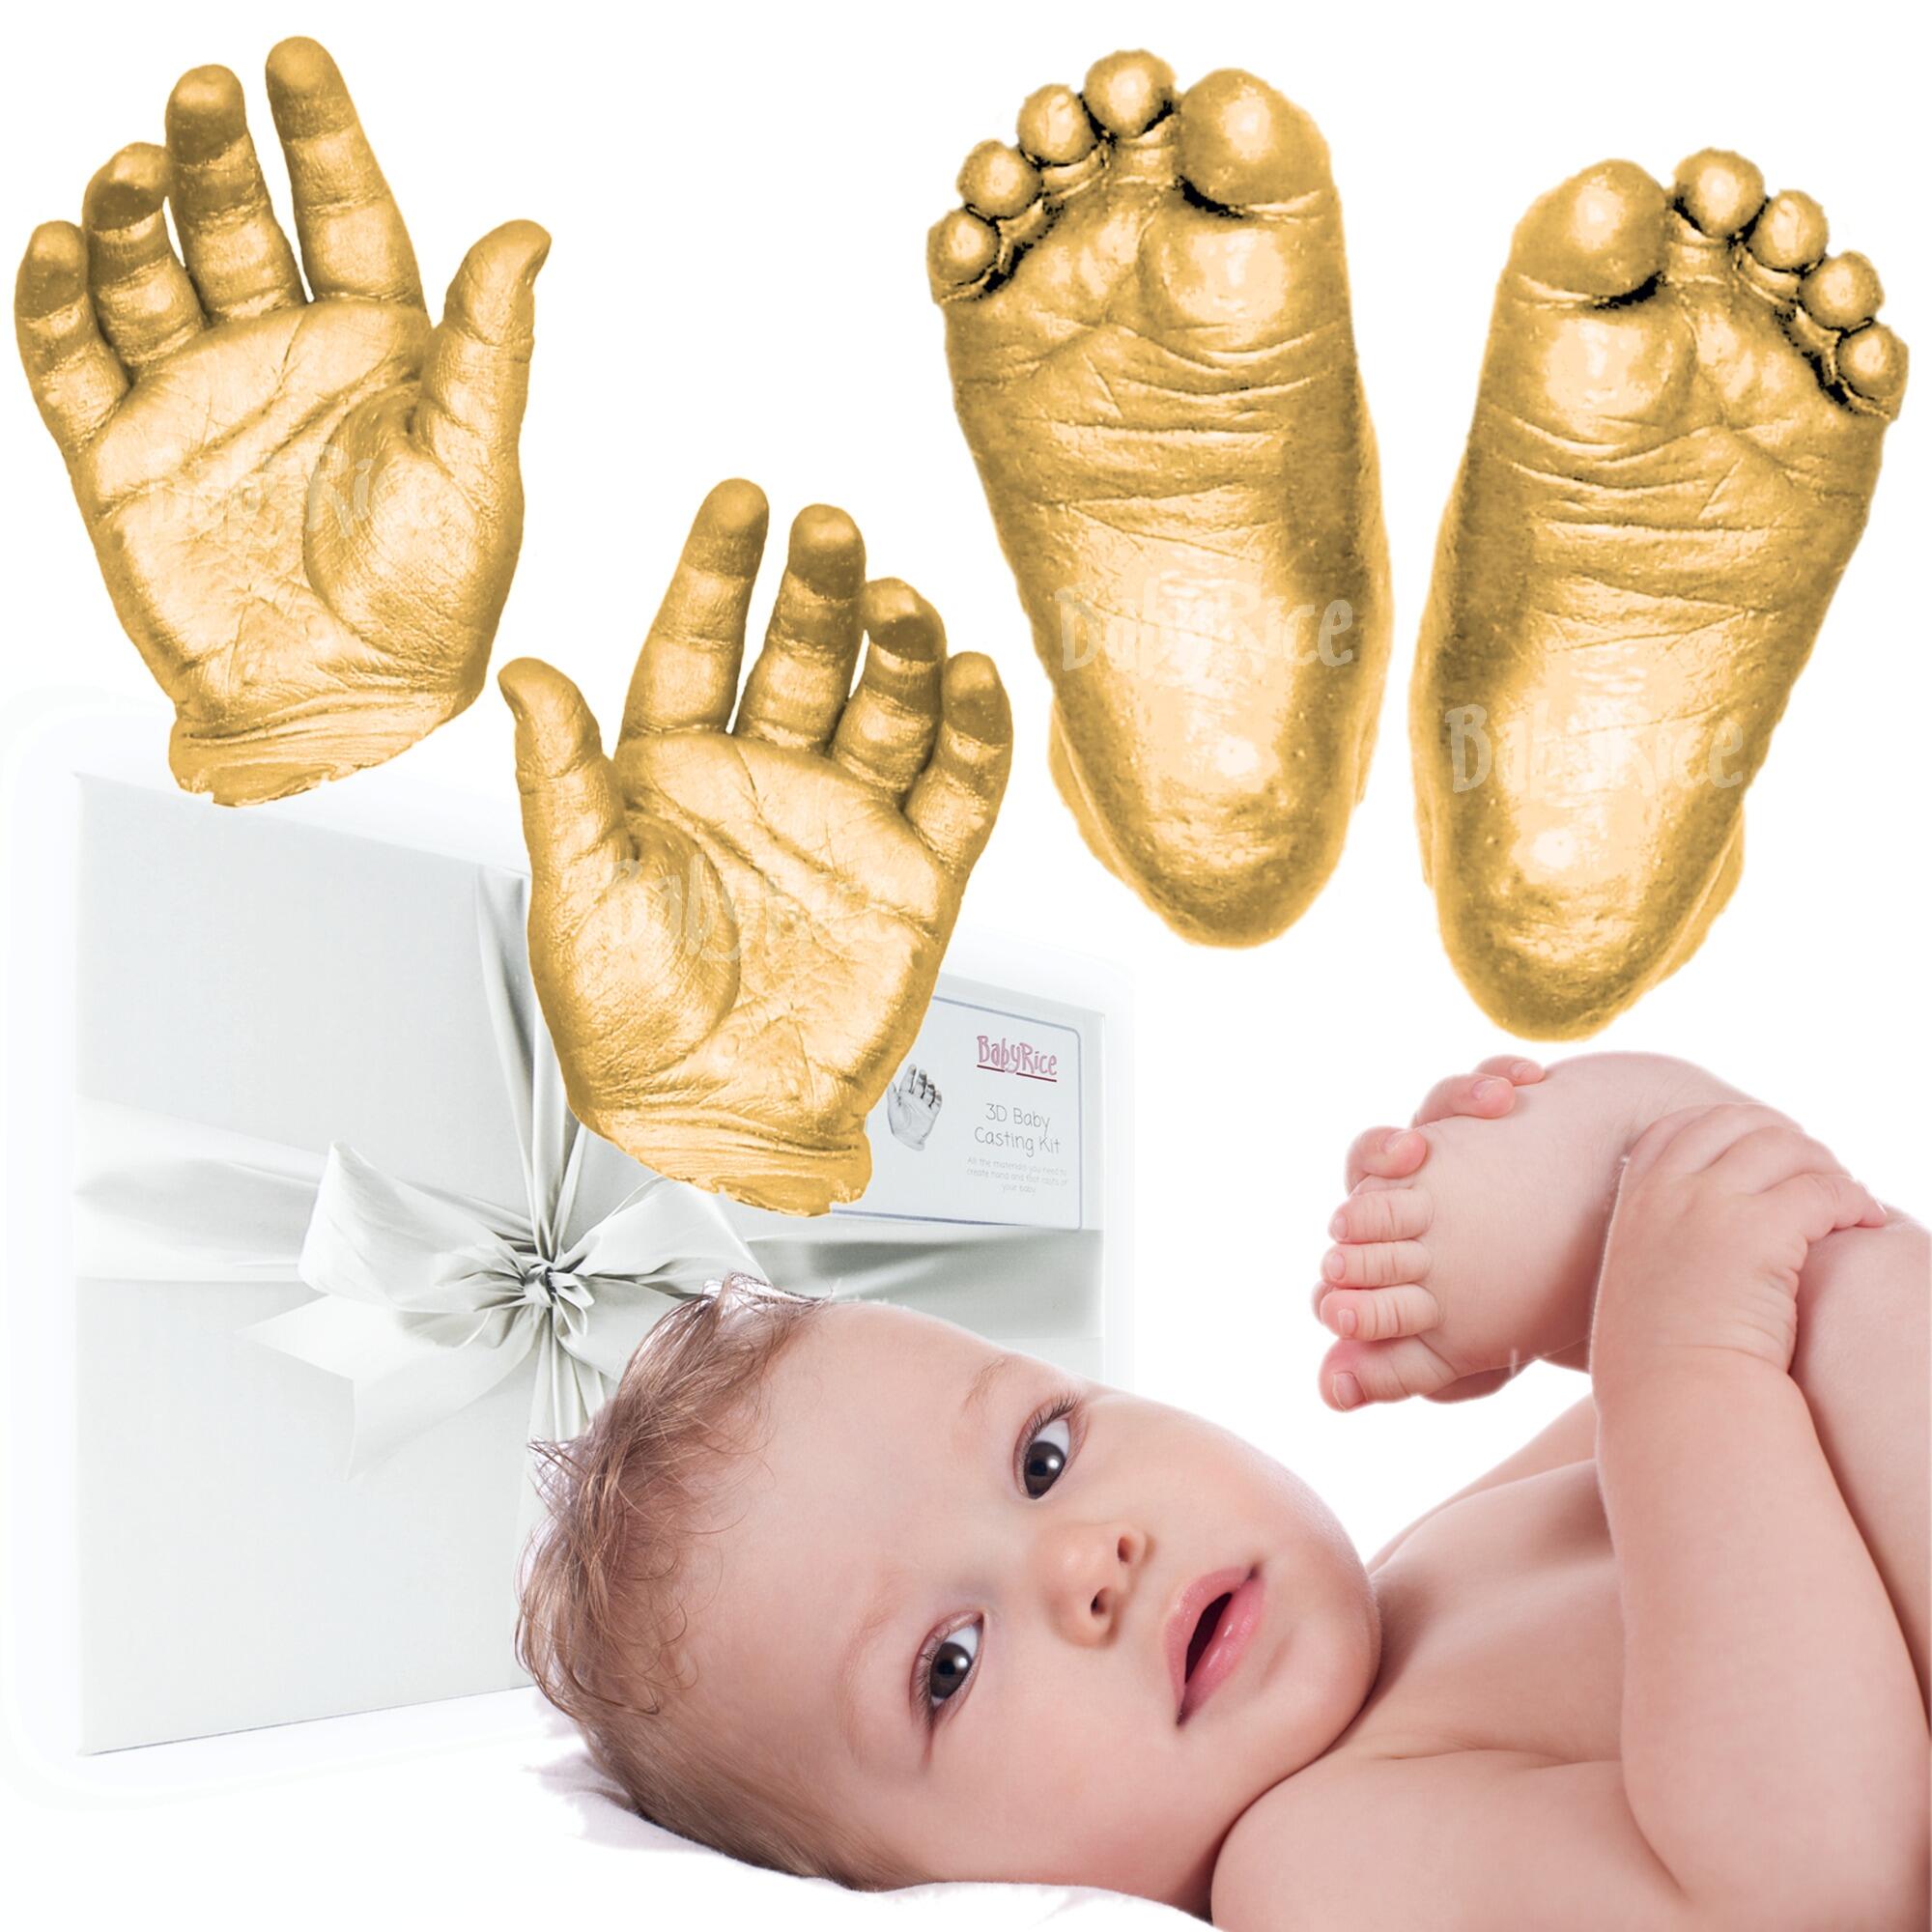 metallic gold baby hands and feet casting kit